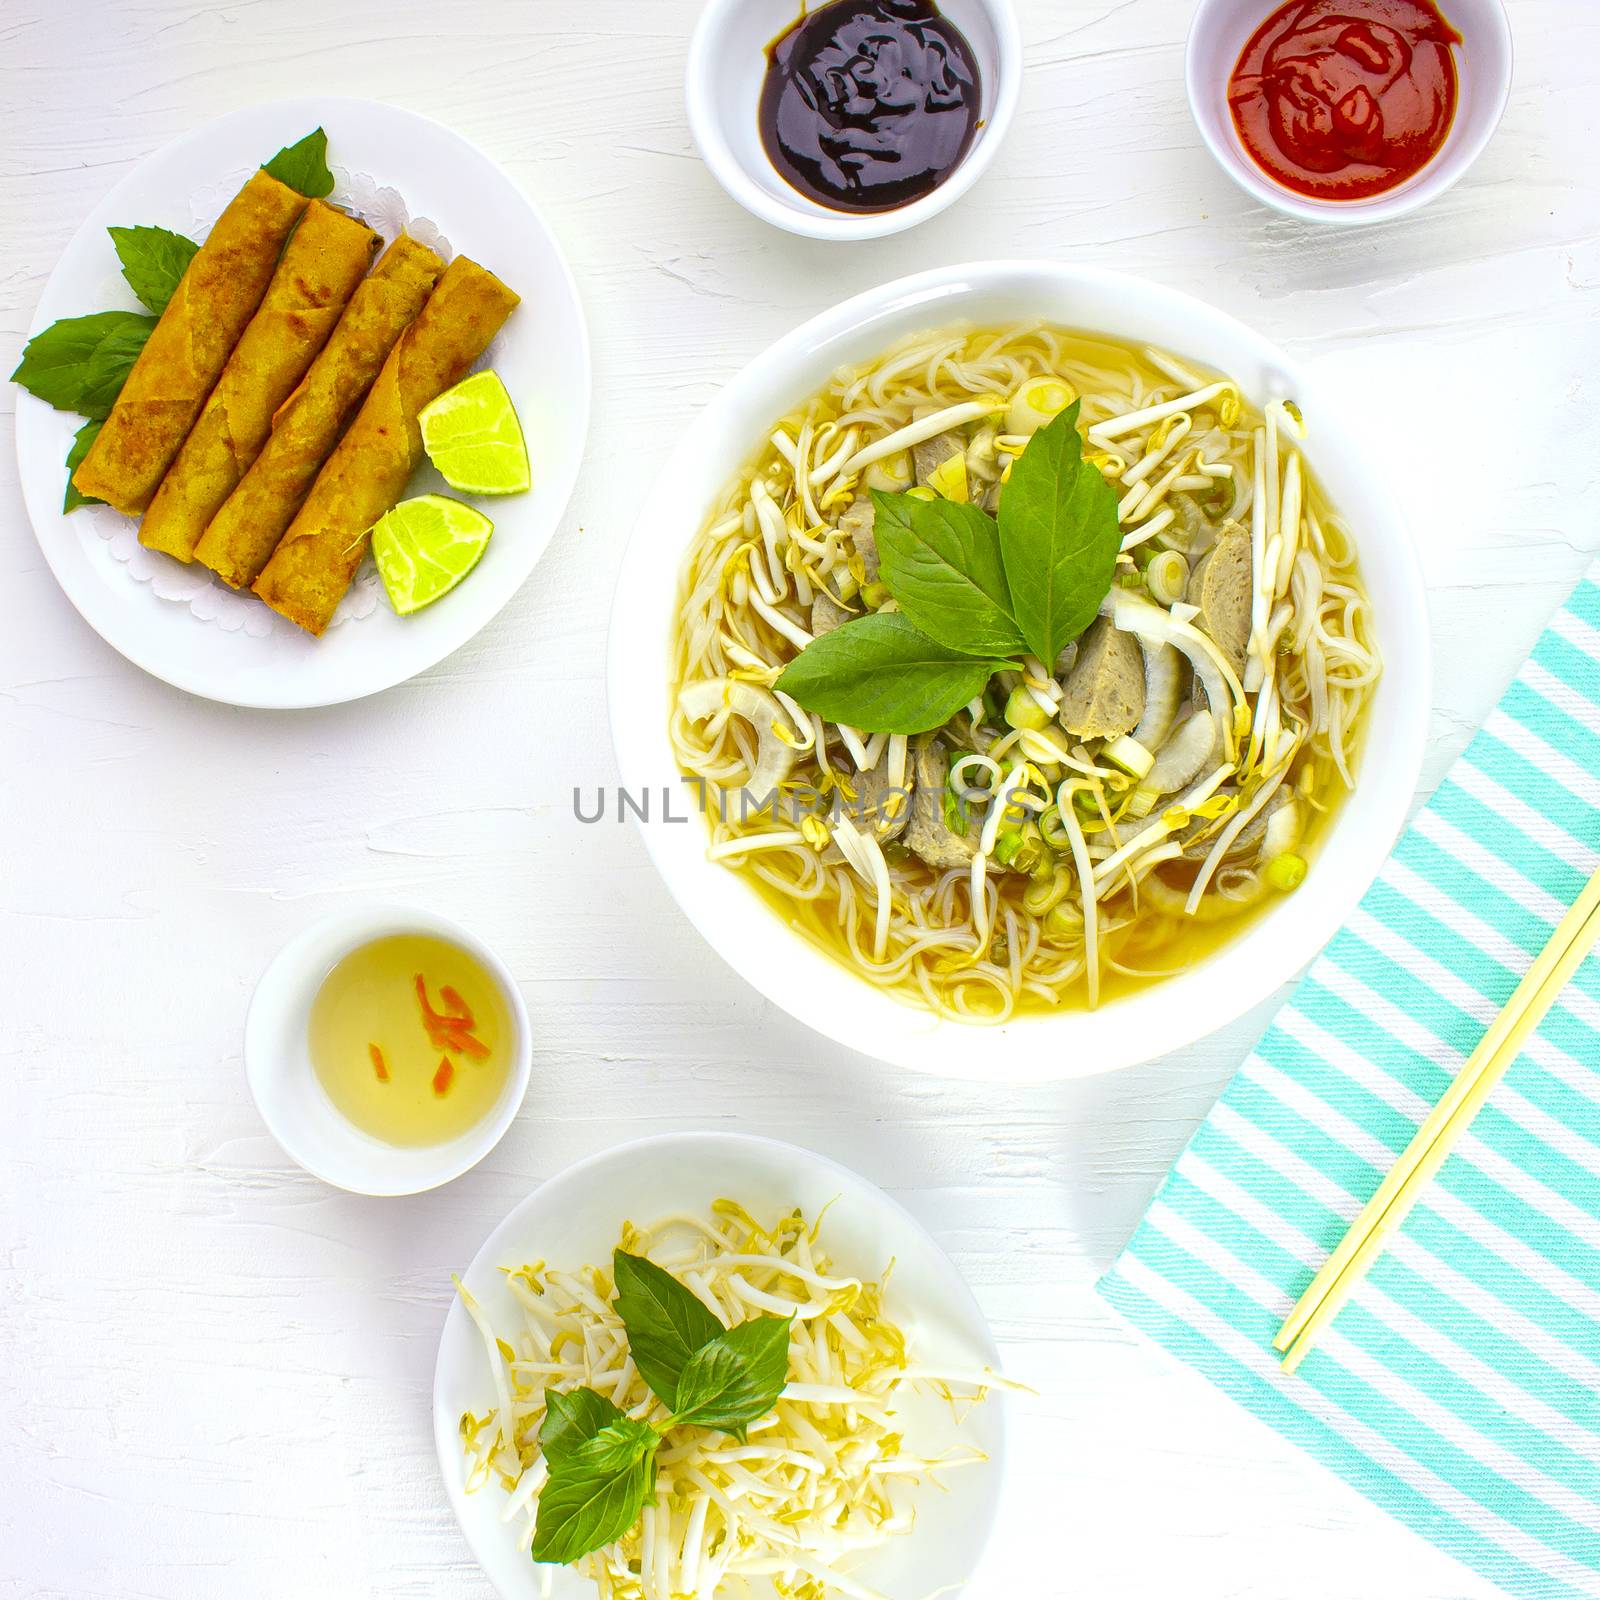 Top view of a Pho vietnamese food noodle soup by oasisamuel